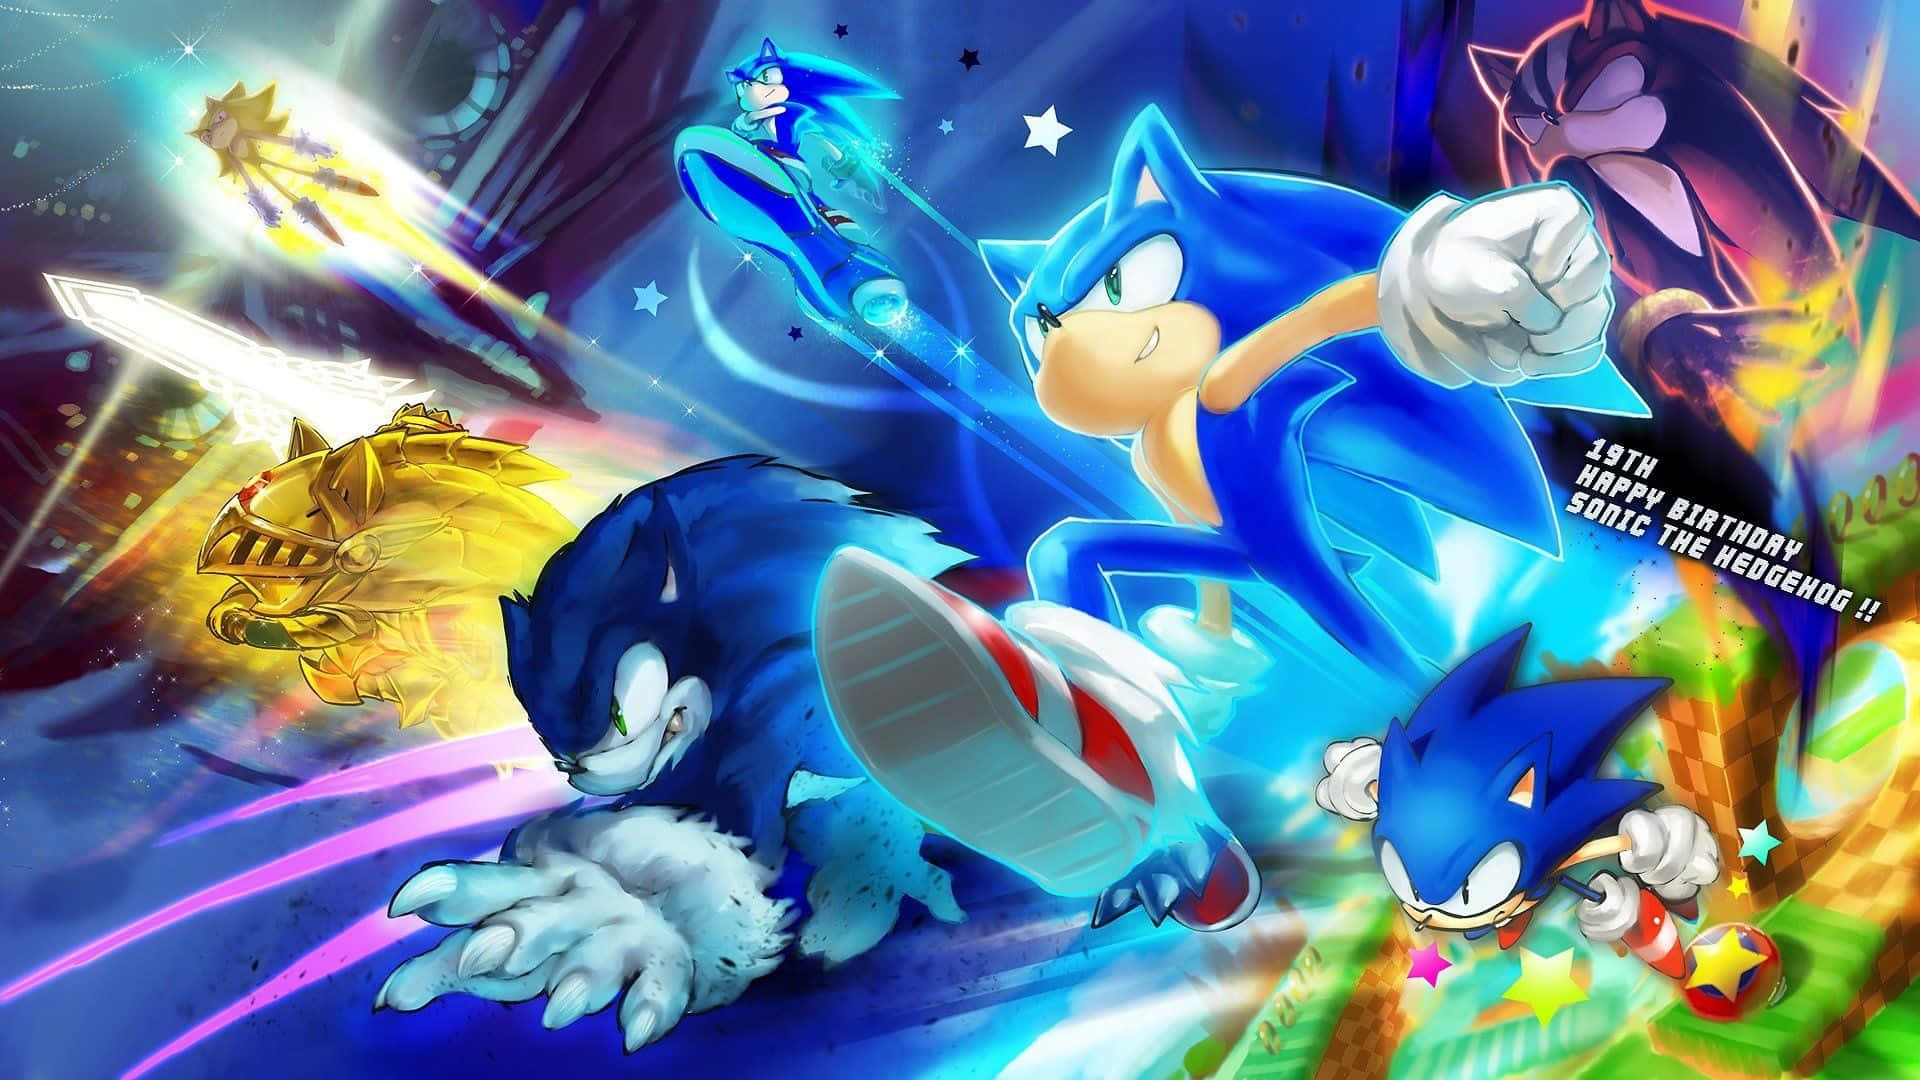 Sonic CD - Classic Adventure Gaming Experience Wallpaper